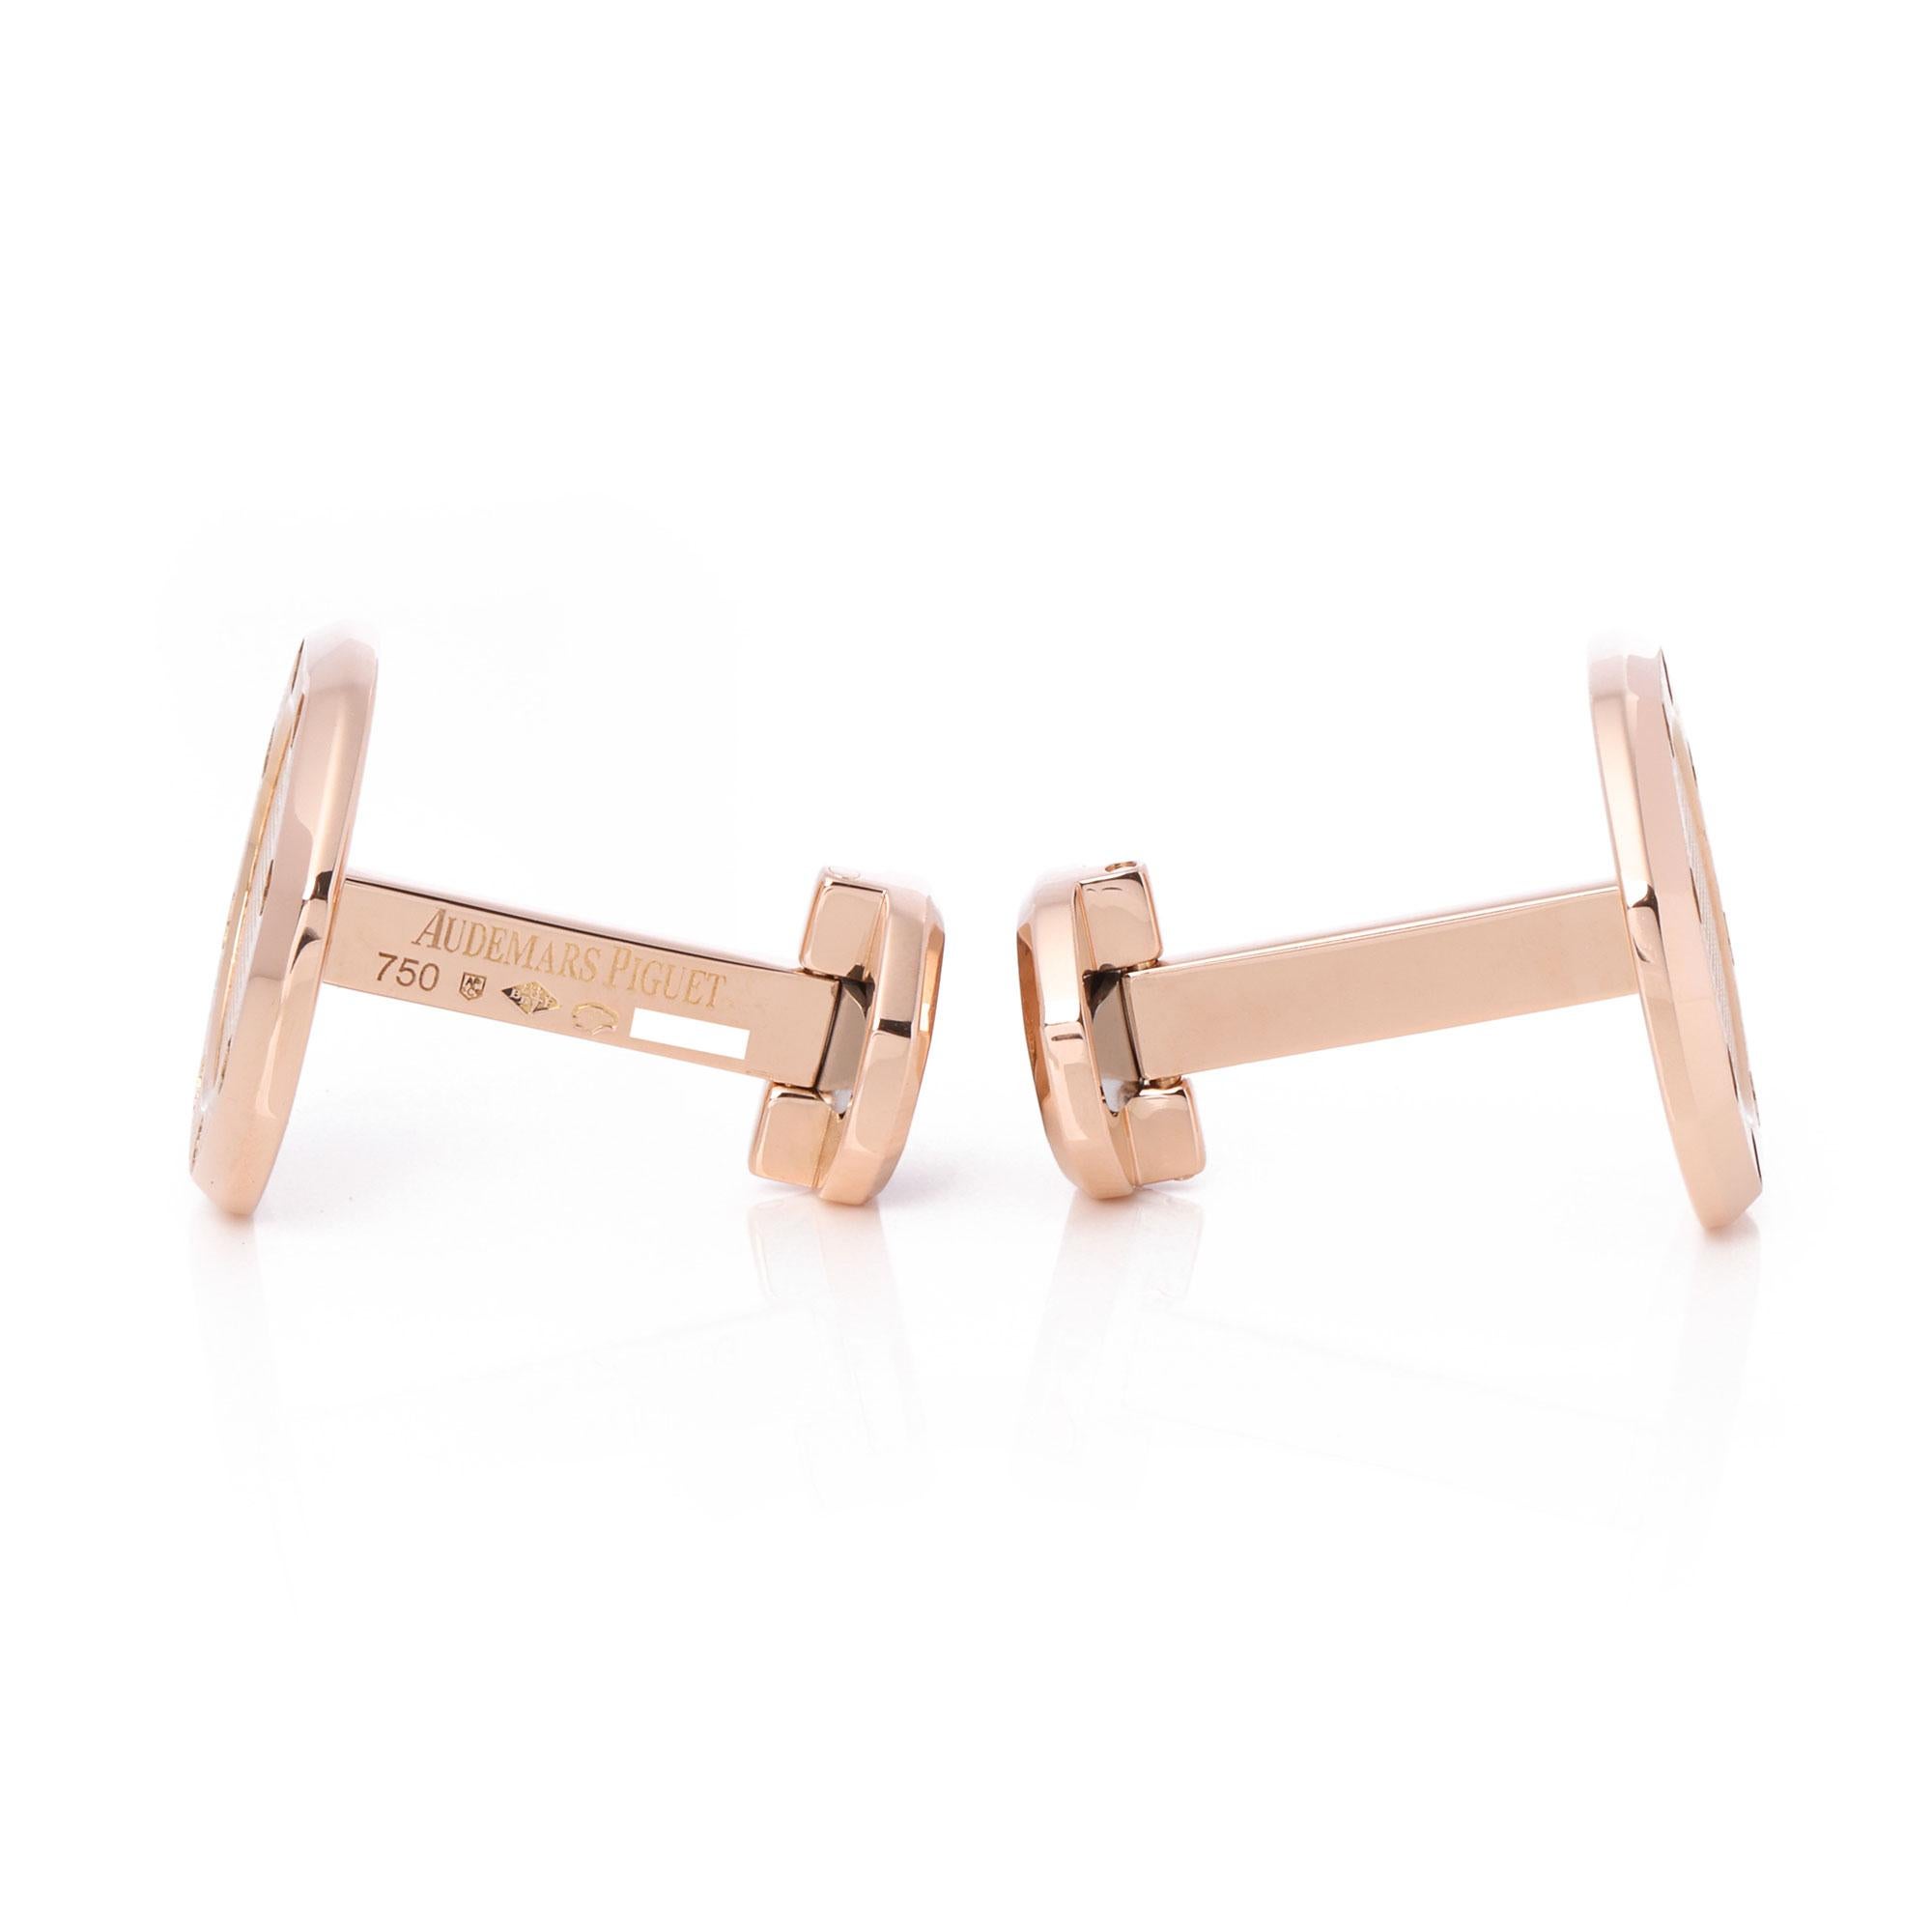 These cufflinks by Audemars Piguet are from their Royal Oak collection, they feature the signature octagonal shape with hexagonal screws and AP's famous 'Tapisserie' dial design in the centre made in 18ct pink gold. Accompanied with a Xupes